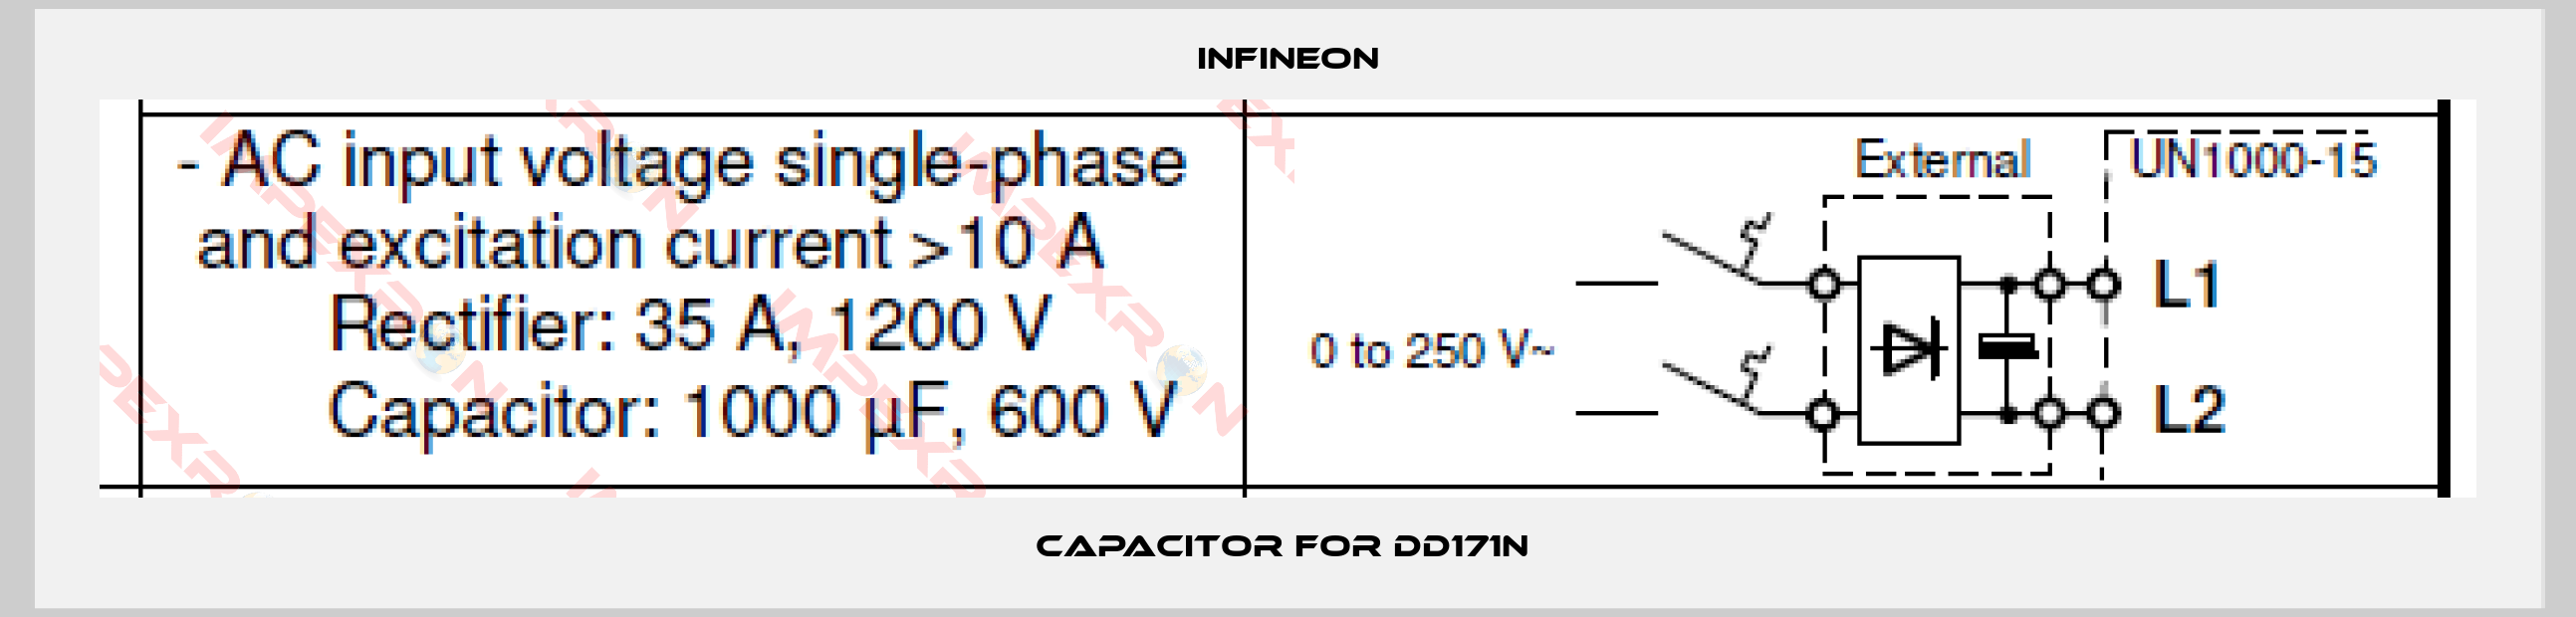 Infineon-Capacitor For DD171N 